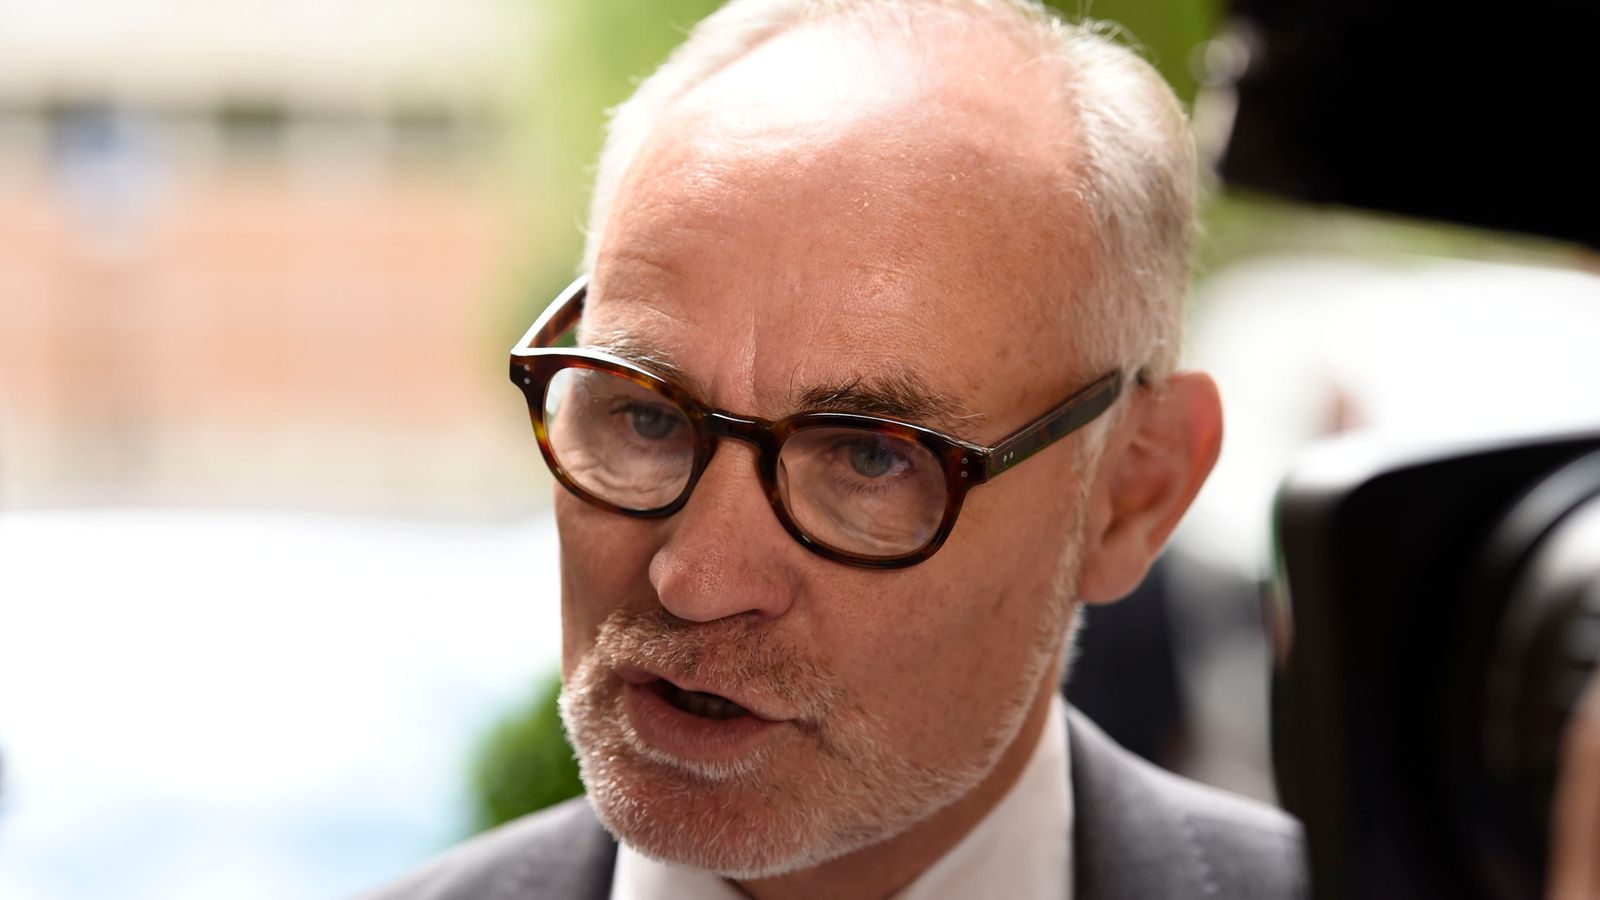 Tory Crispin Blunt criticised for ‘disgraceful’ comments on jury conviction of fellow MP Imran Ahmad Khan | Politics News